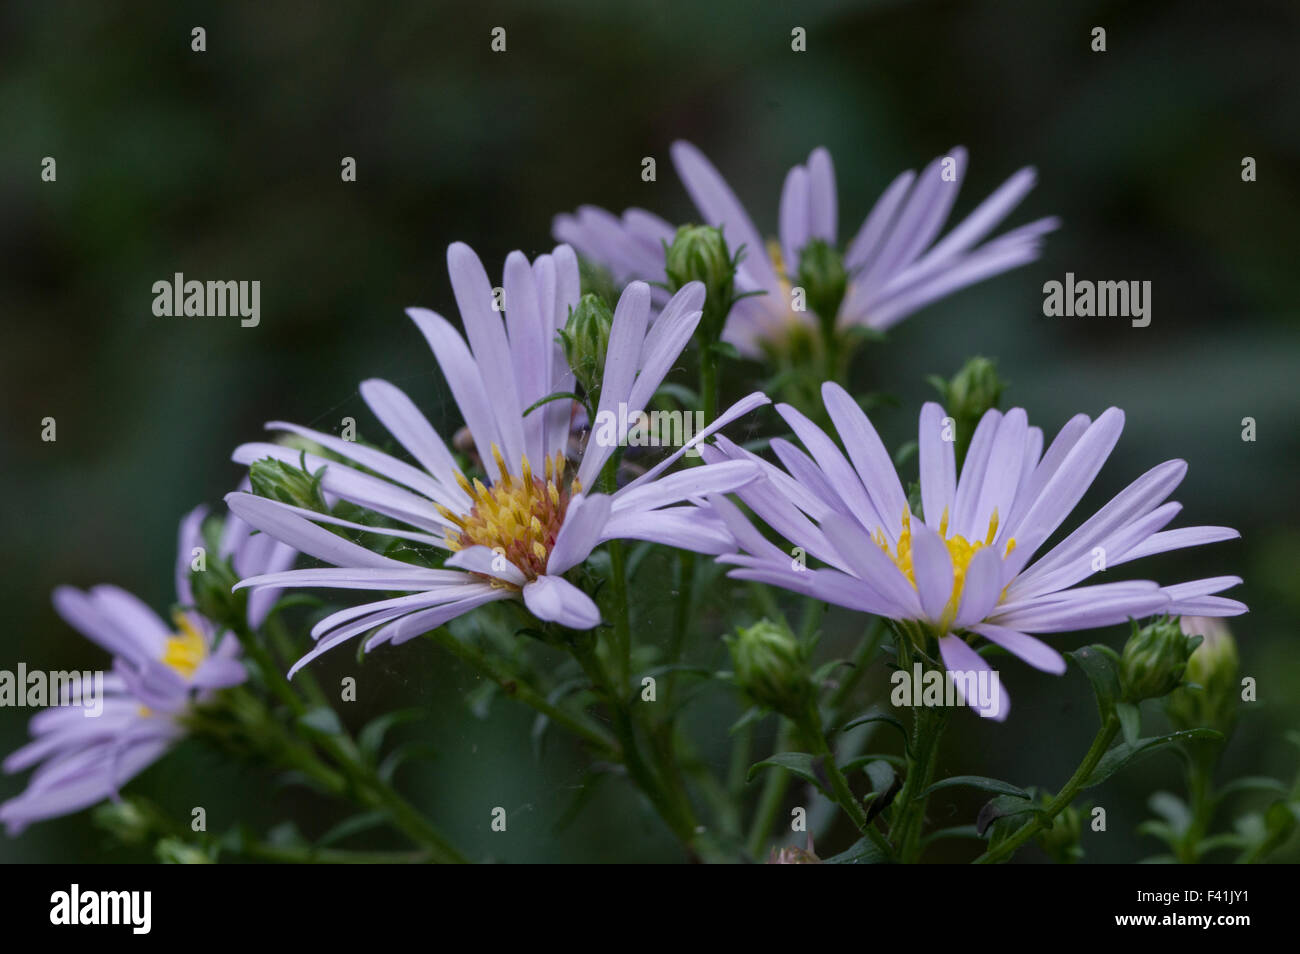 King George Michaelmas Daisy is an older variety of perennial aster, and one of the best with its prolific, early, long-lasting show of violet Stock Photo